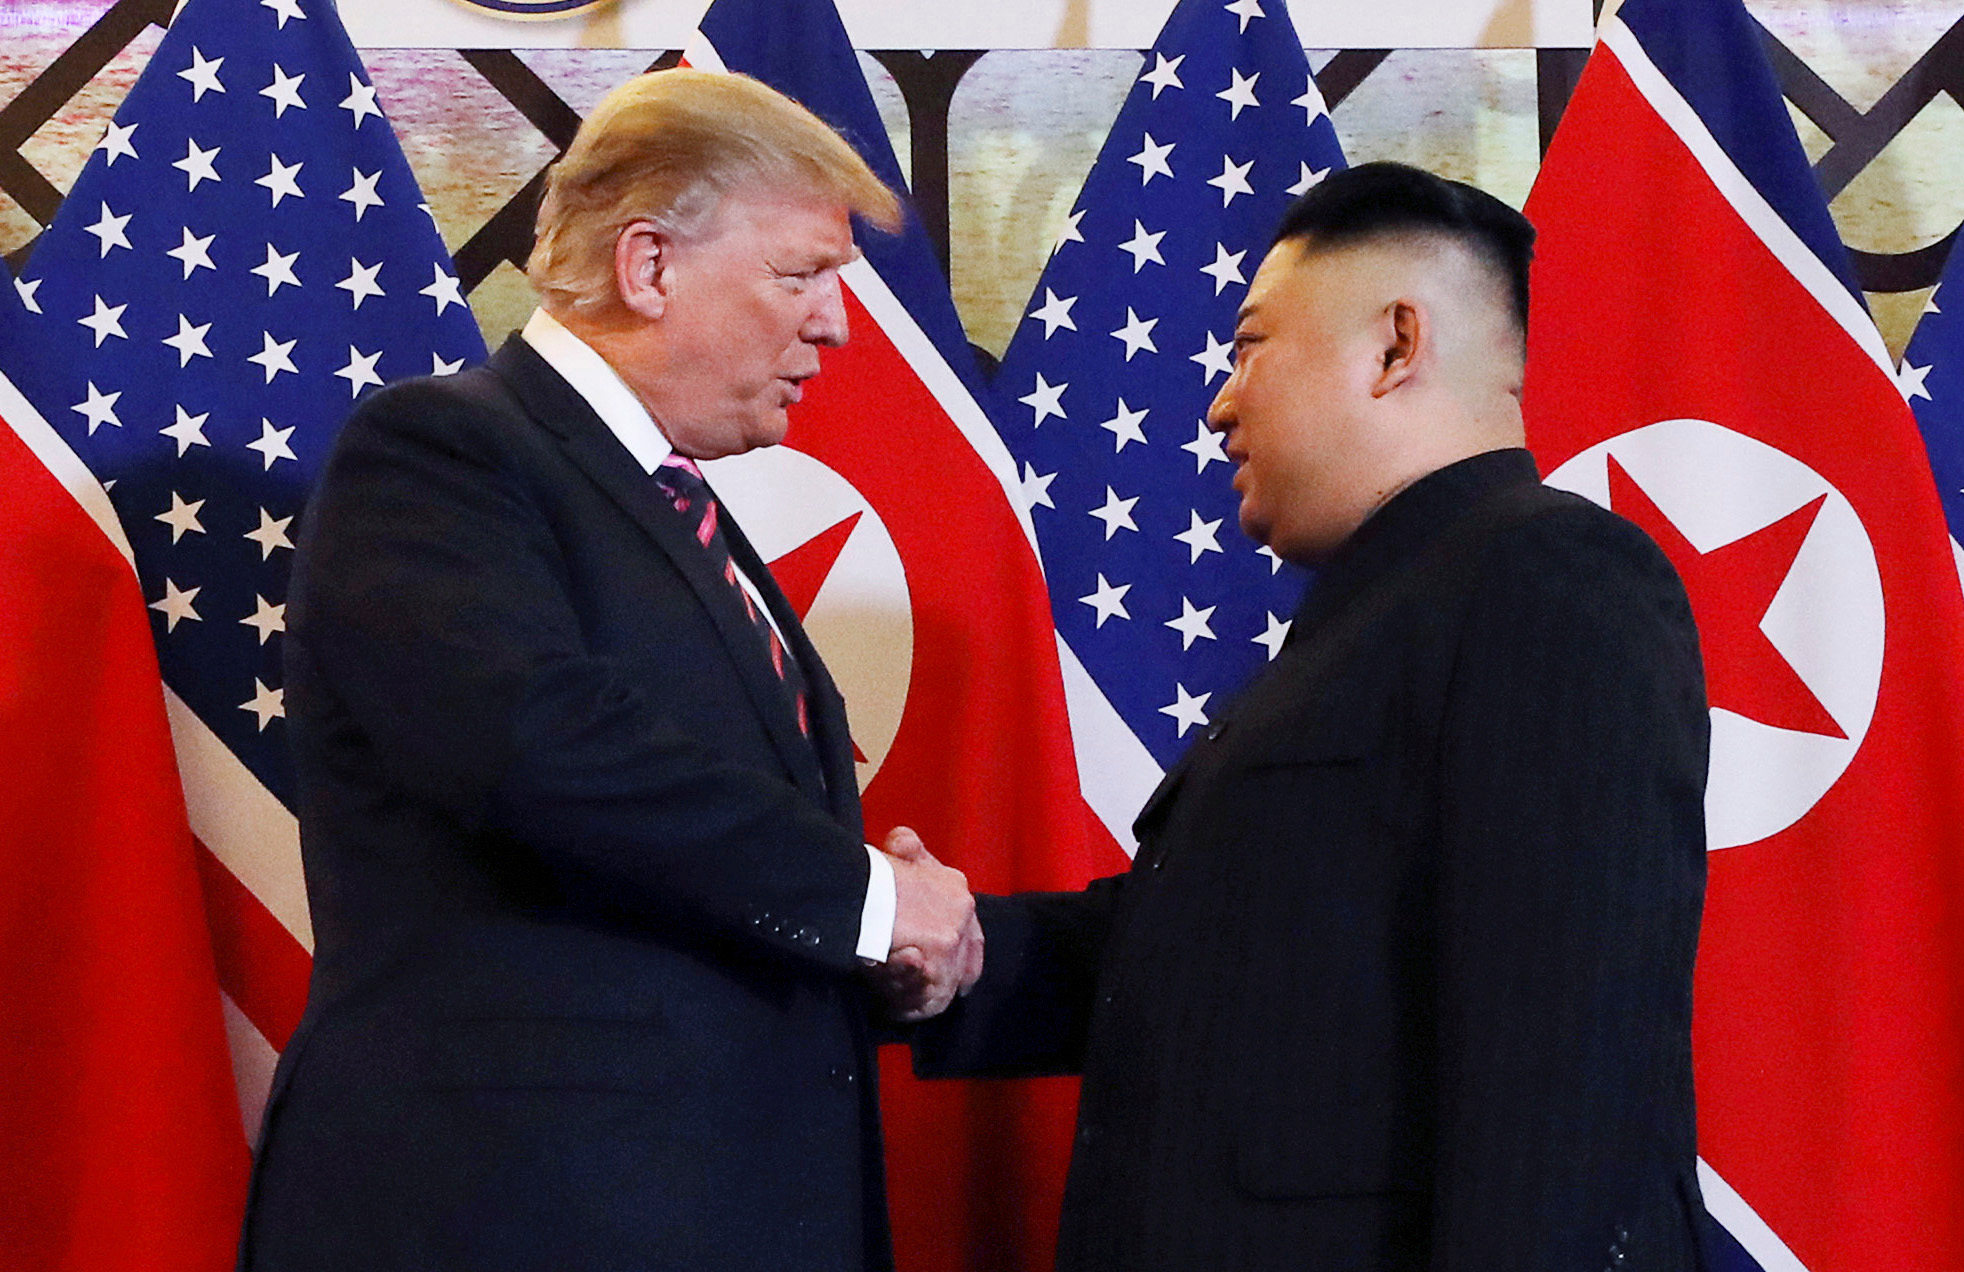 Kim won't do anything to end great economic potential of N Korea - Trump